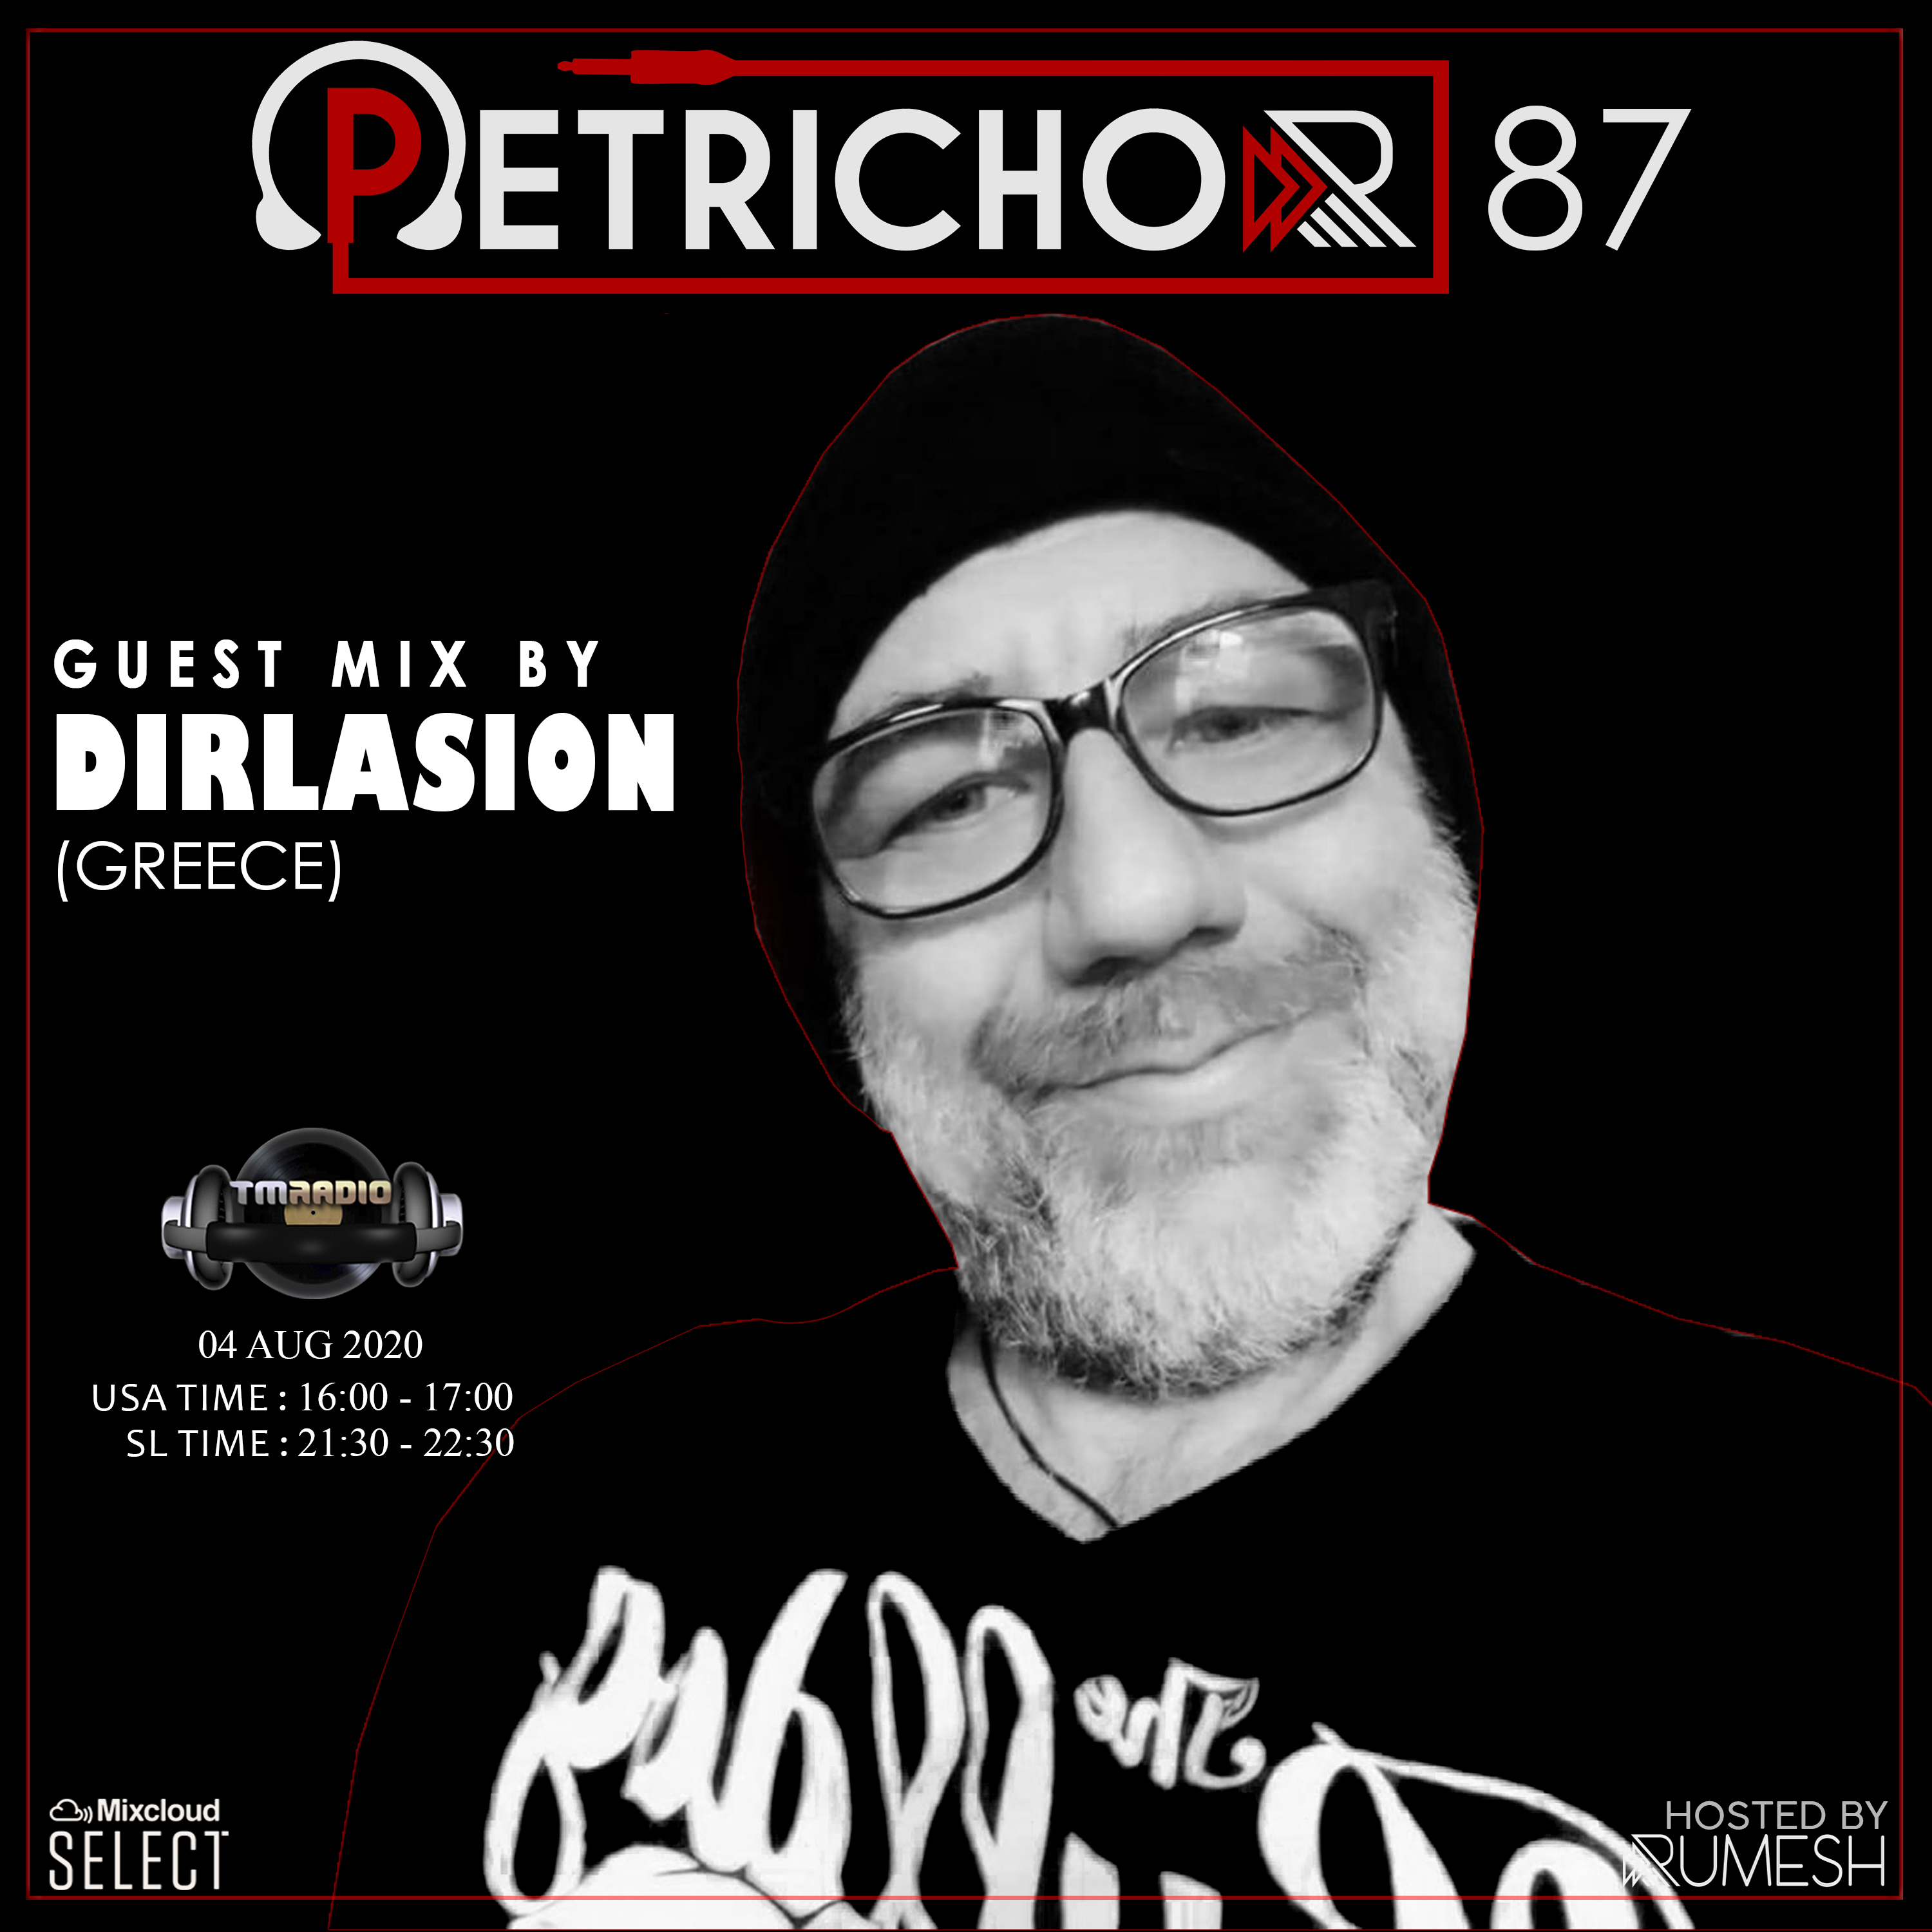 Petrichor 87 guest mix by Dirlasion (Greece) (from August 4th, 2020)